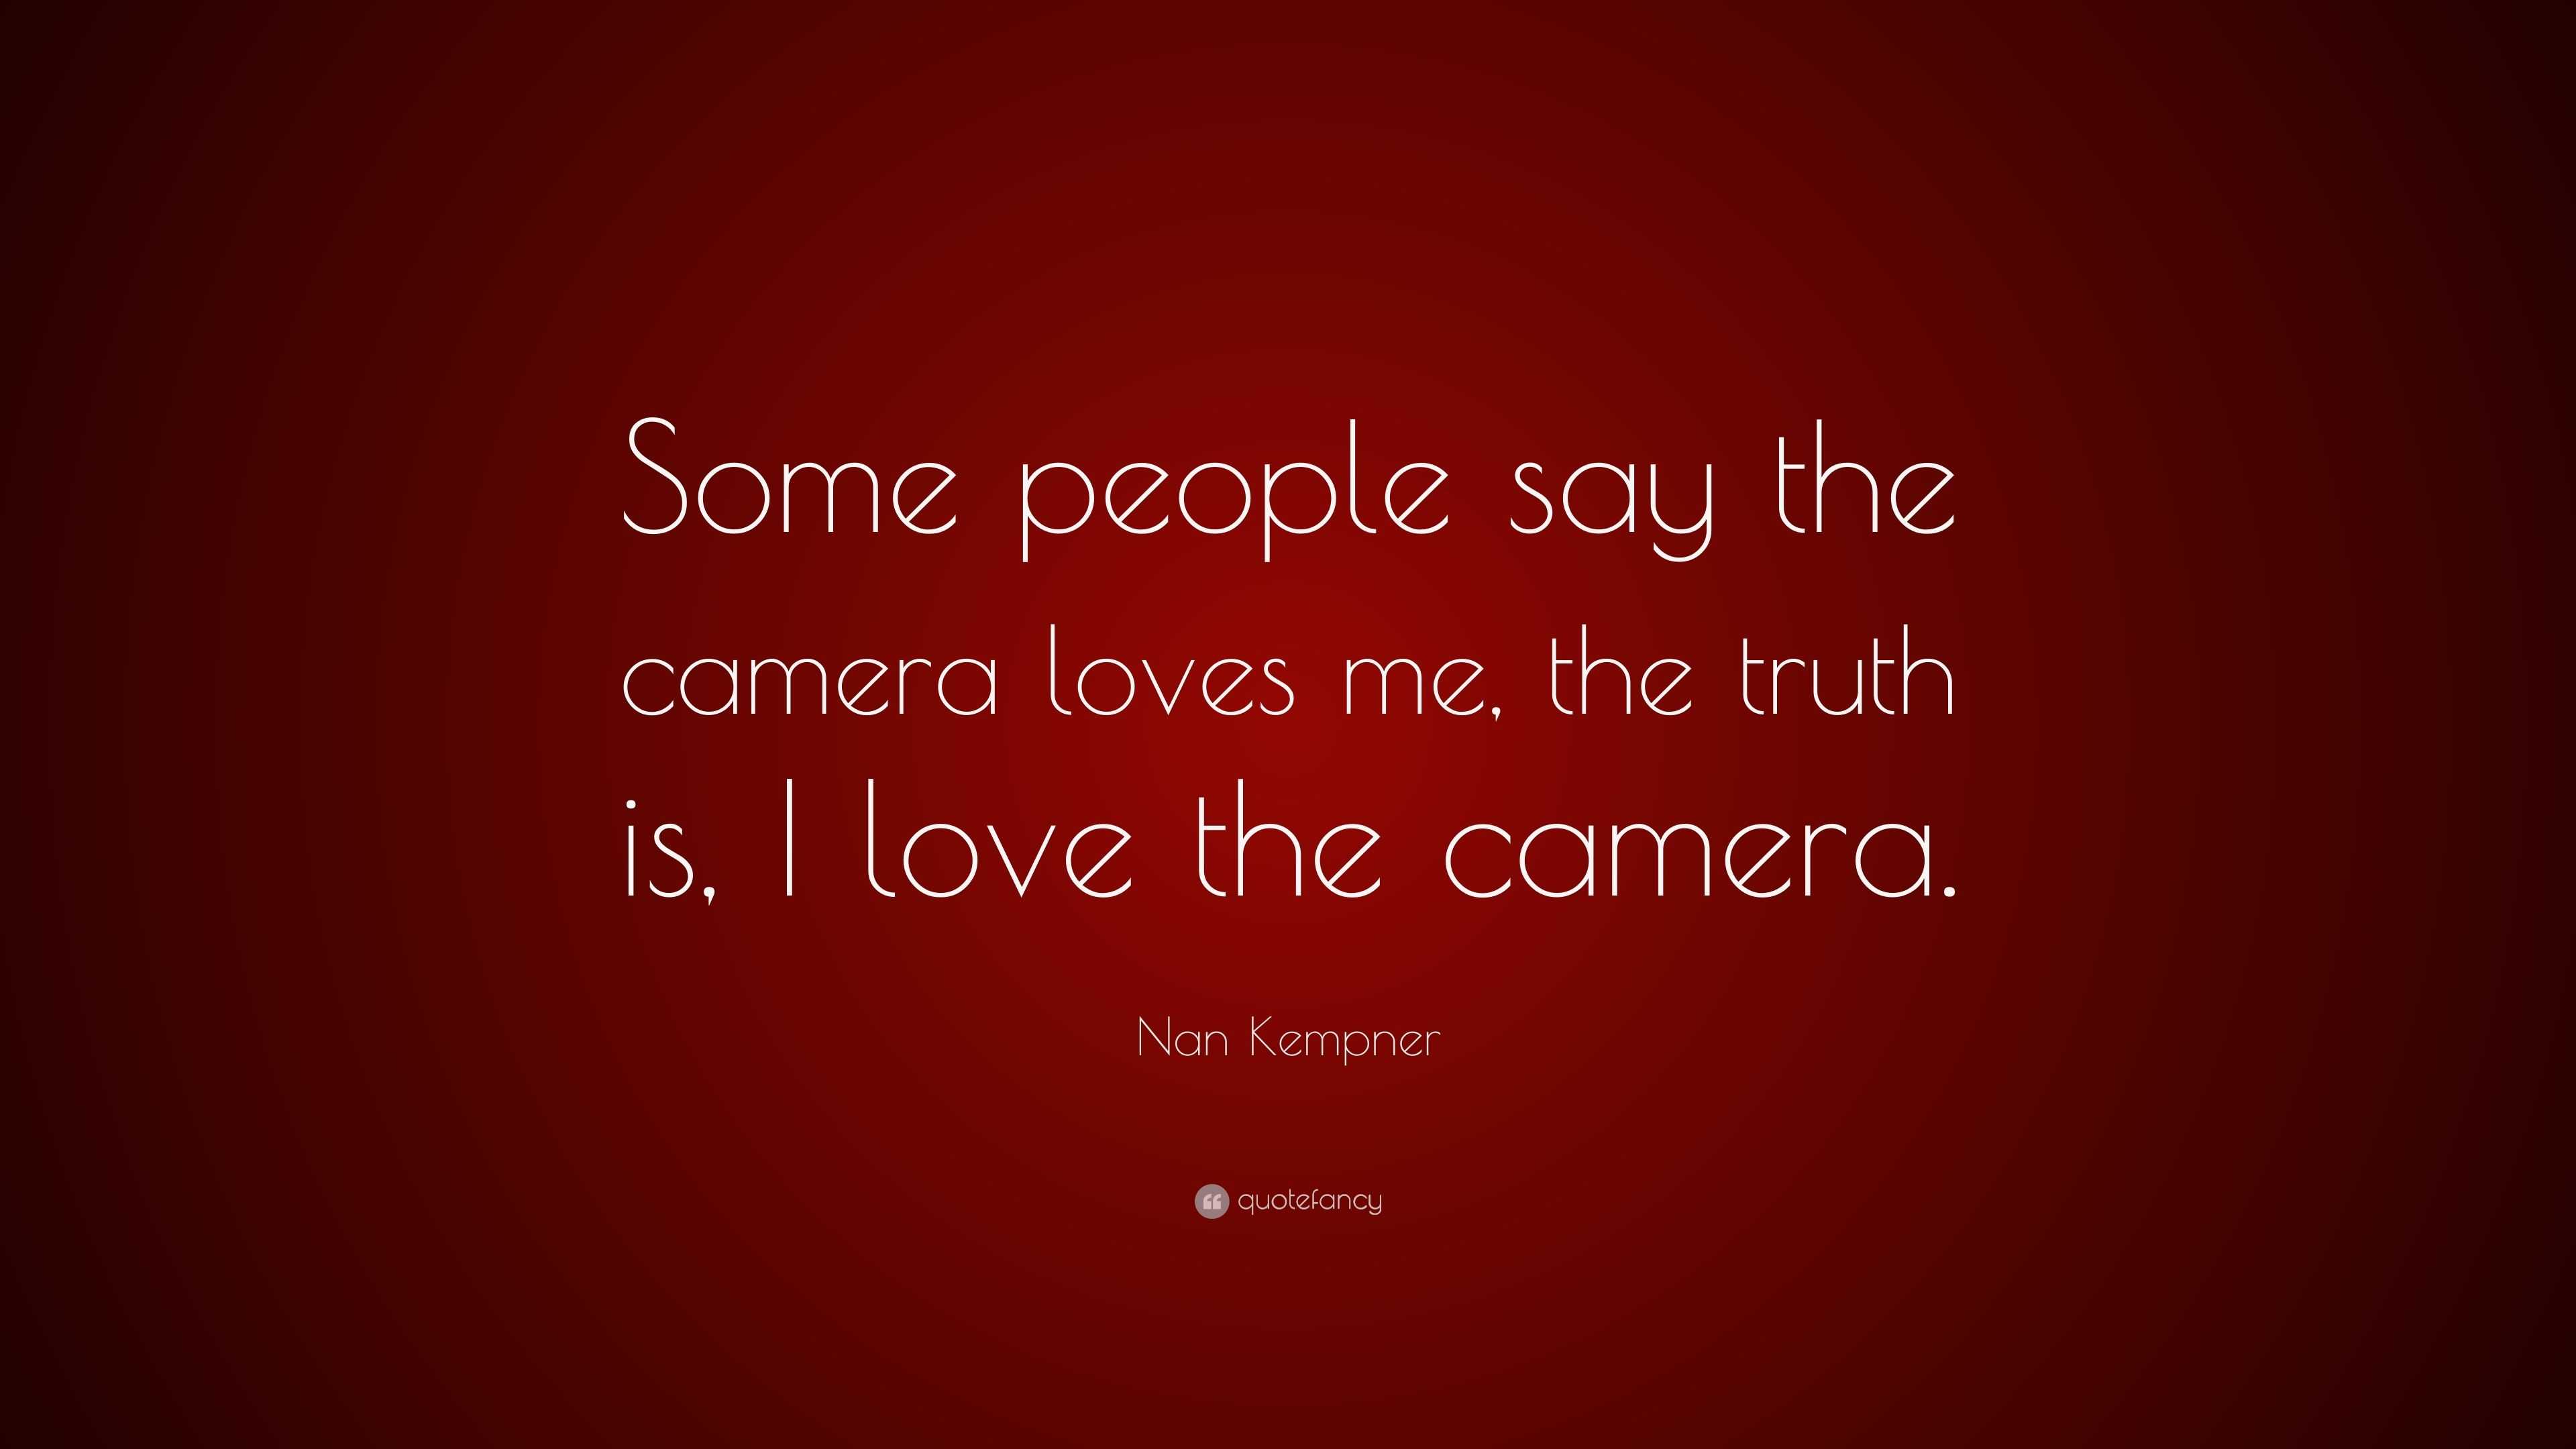 Nan Kempner Quote: “Some people say the camera loves me, the truth is ...